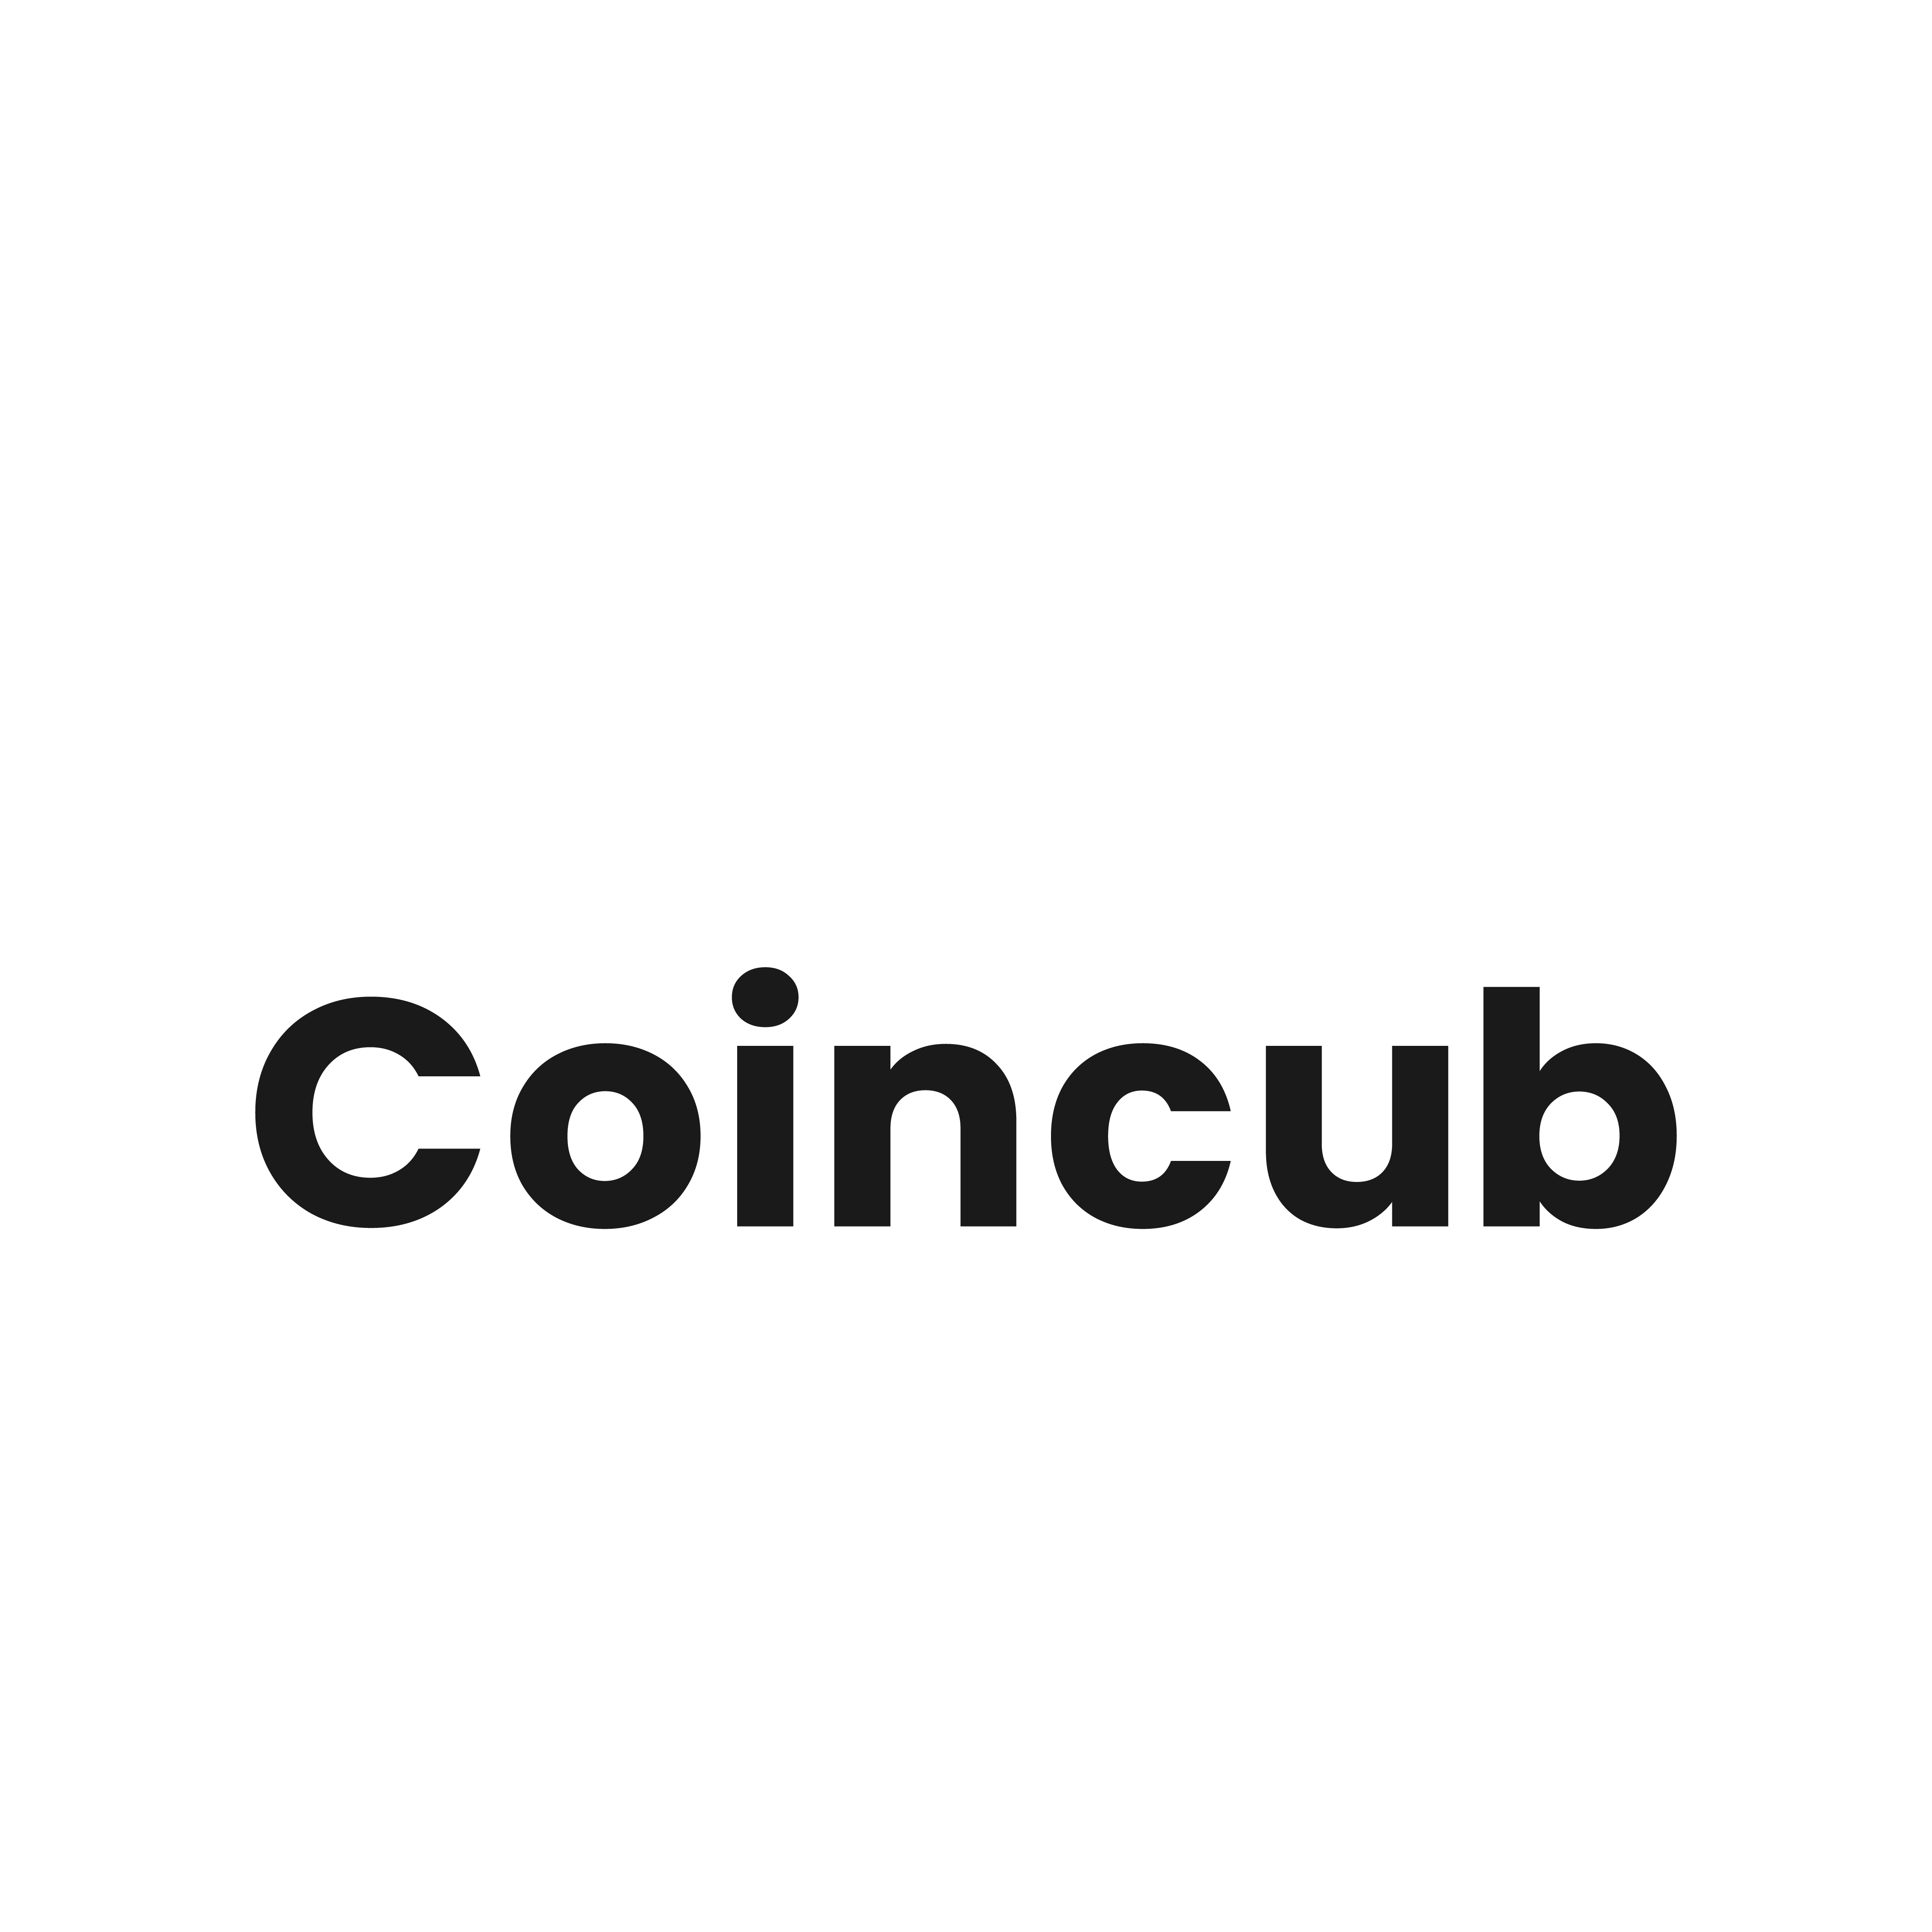 Coincub Official